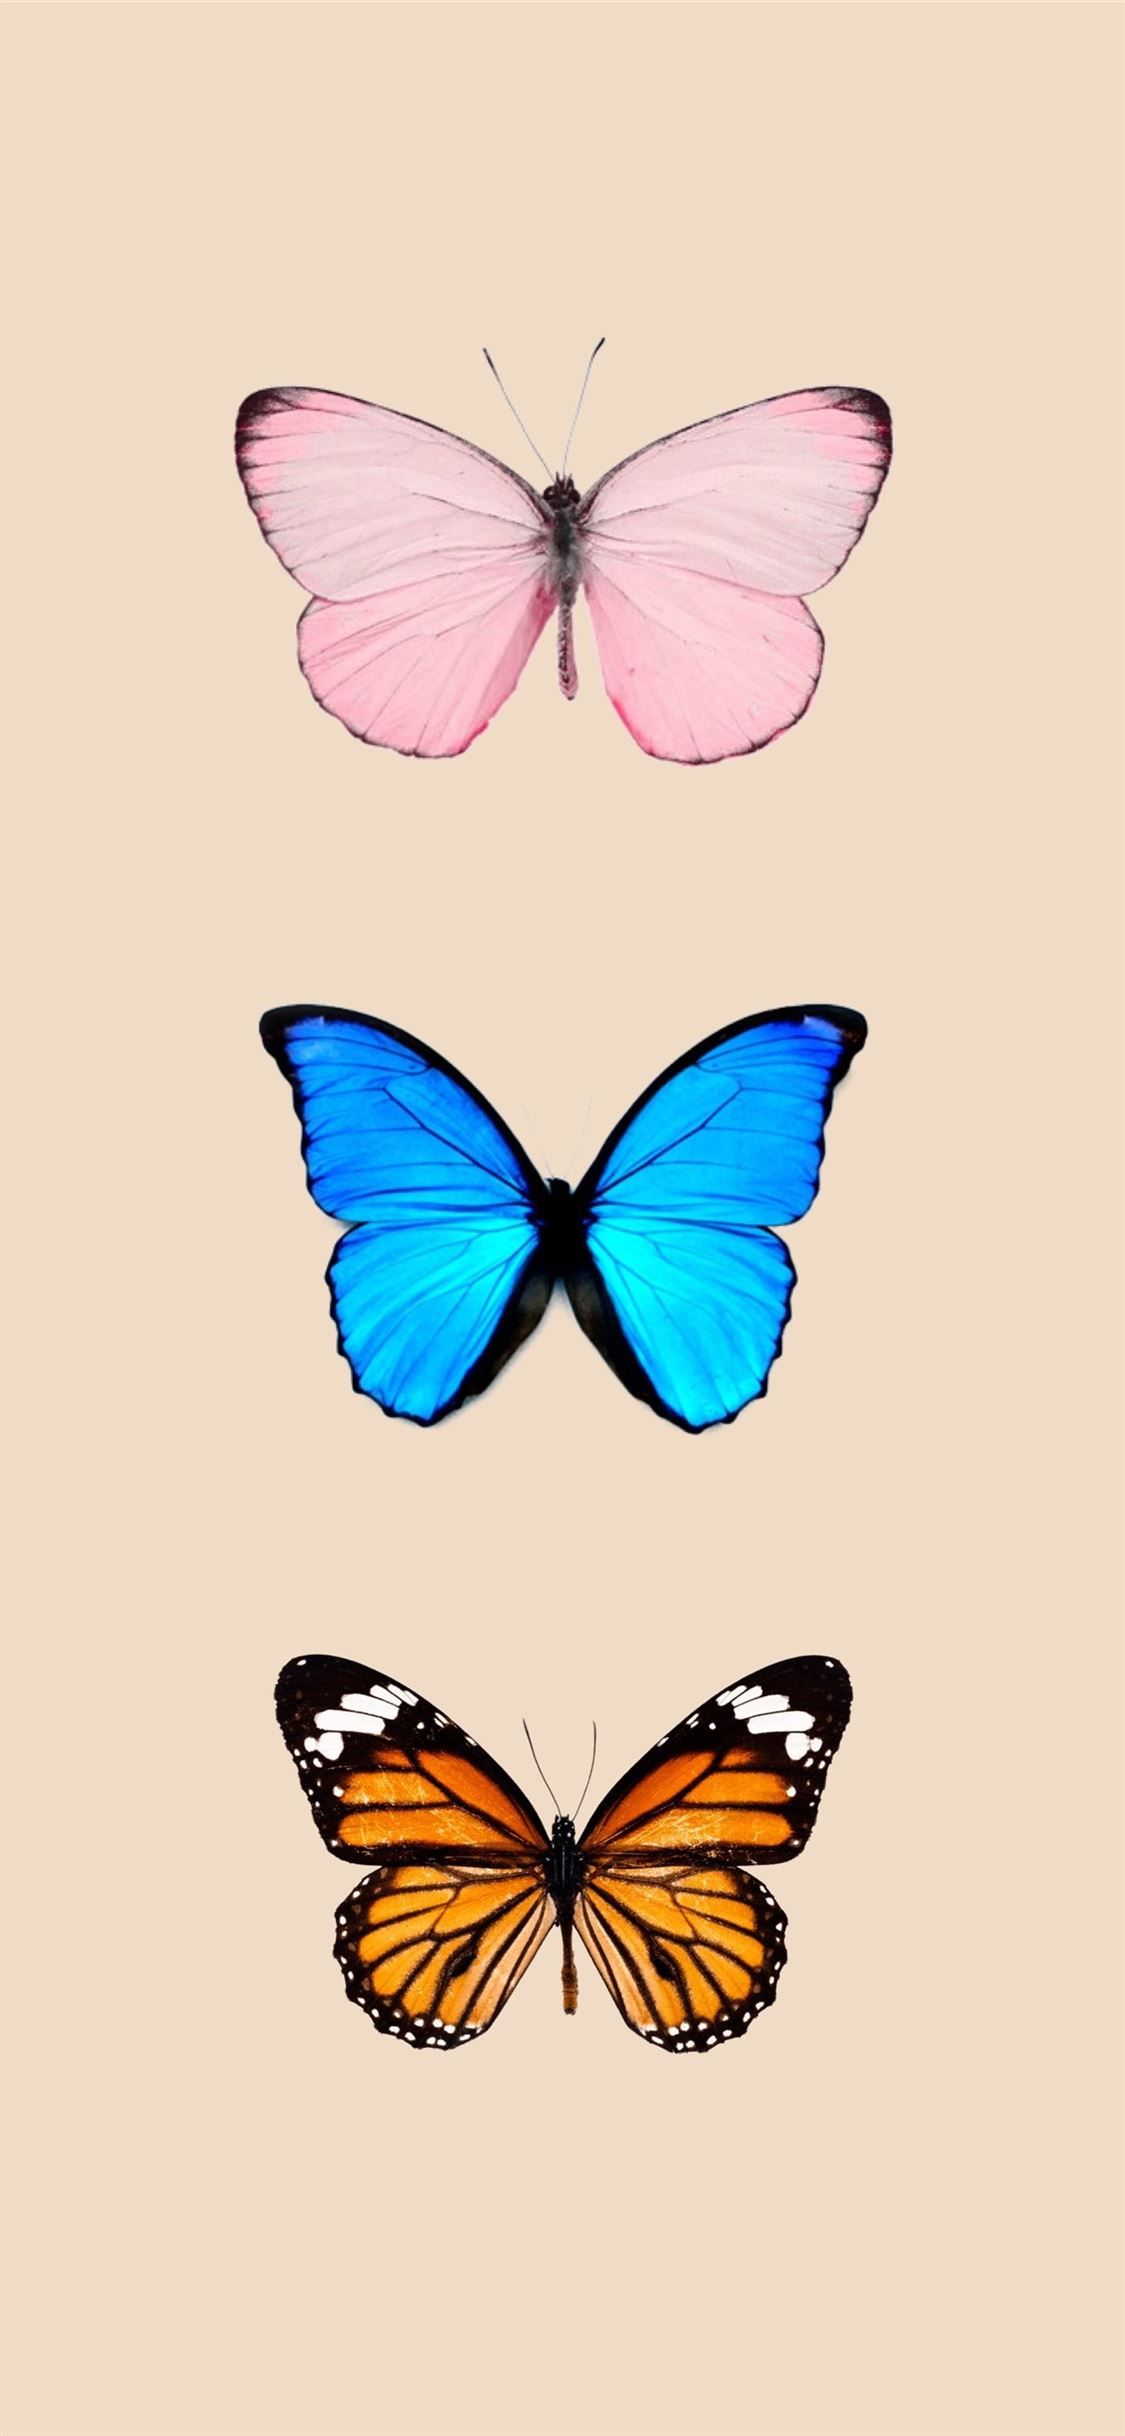 Butterfly backgrounds iPhone iPhone Wallpapers Free Download